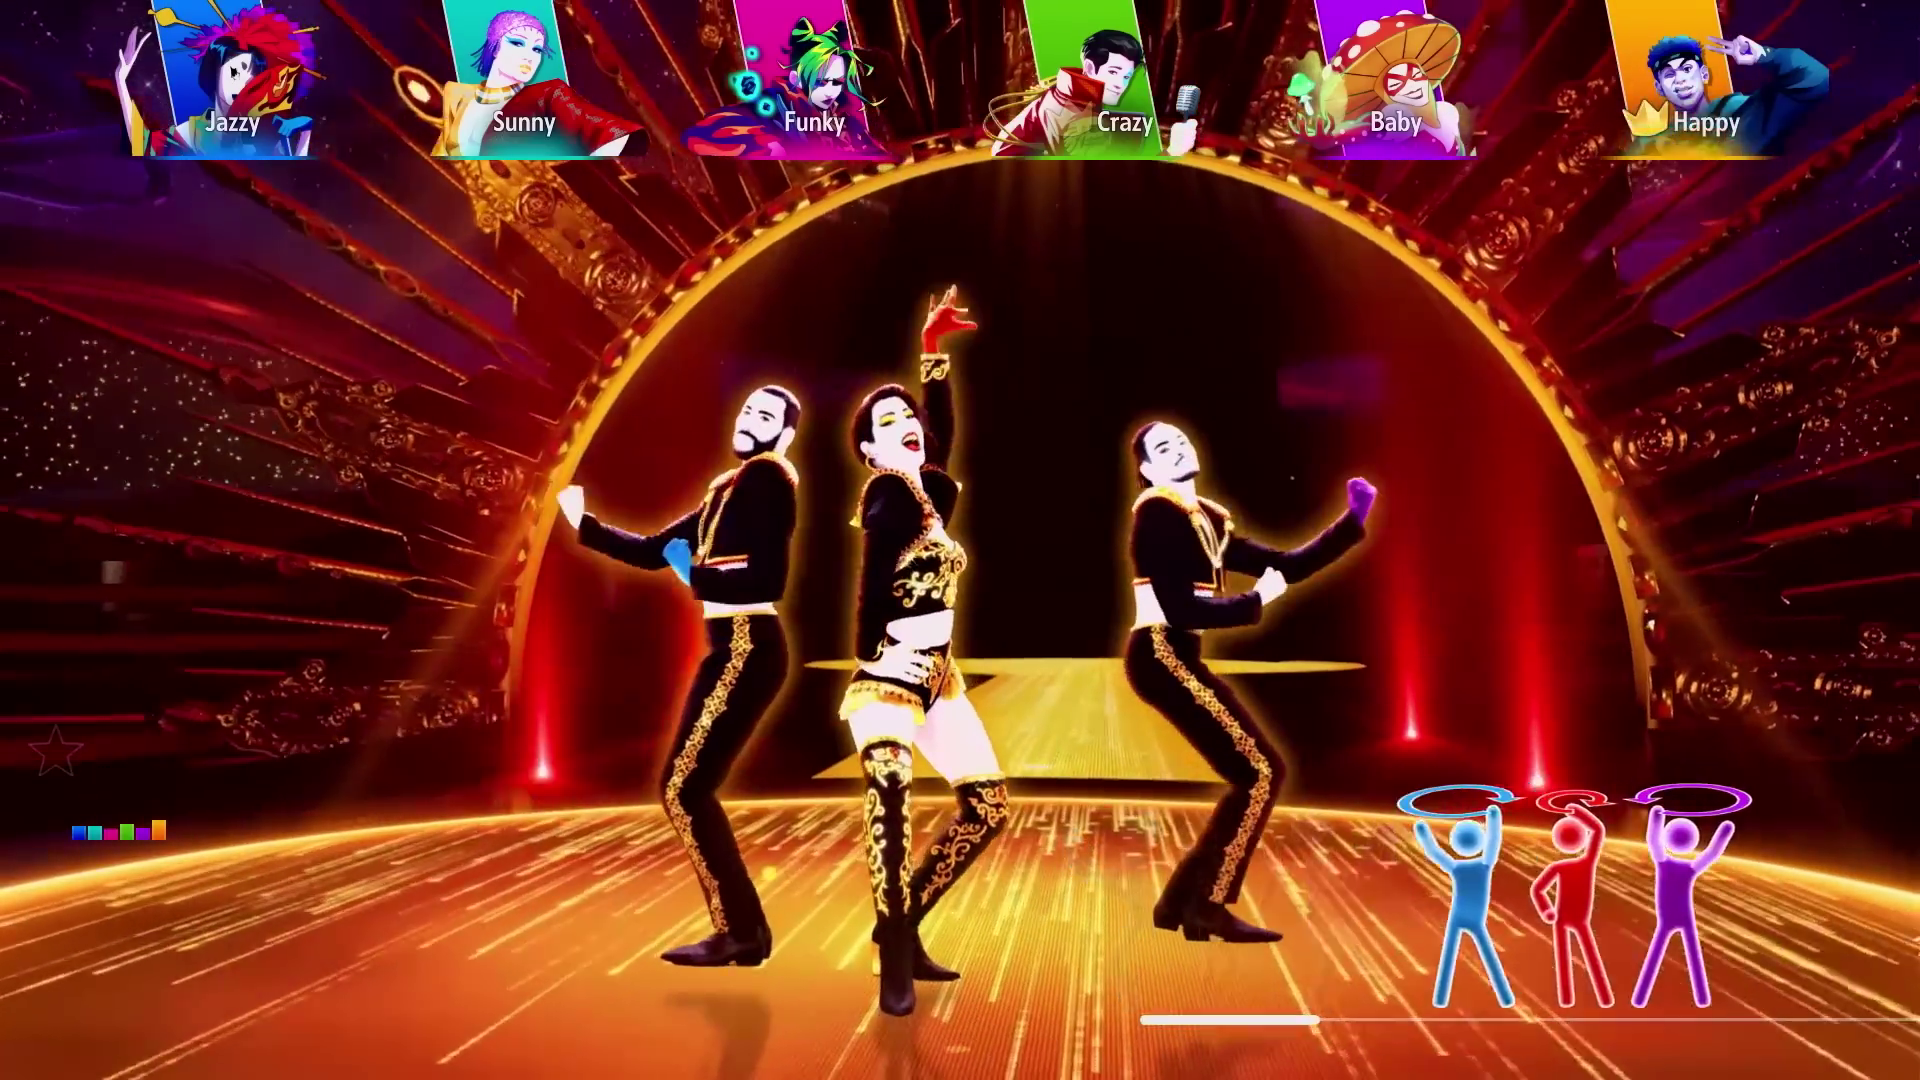 Just Dance 2022 doesn't break new ground but remains as fun as ever 